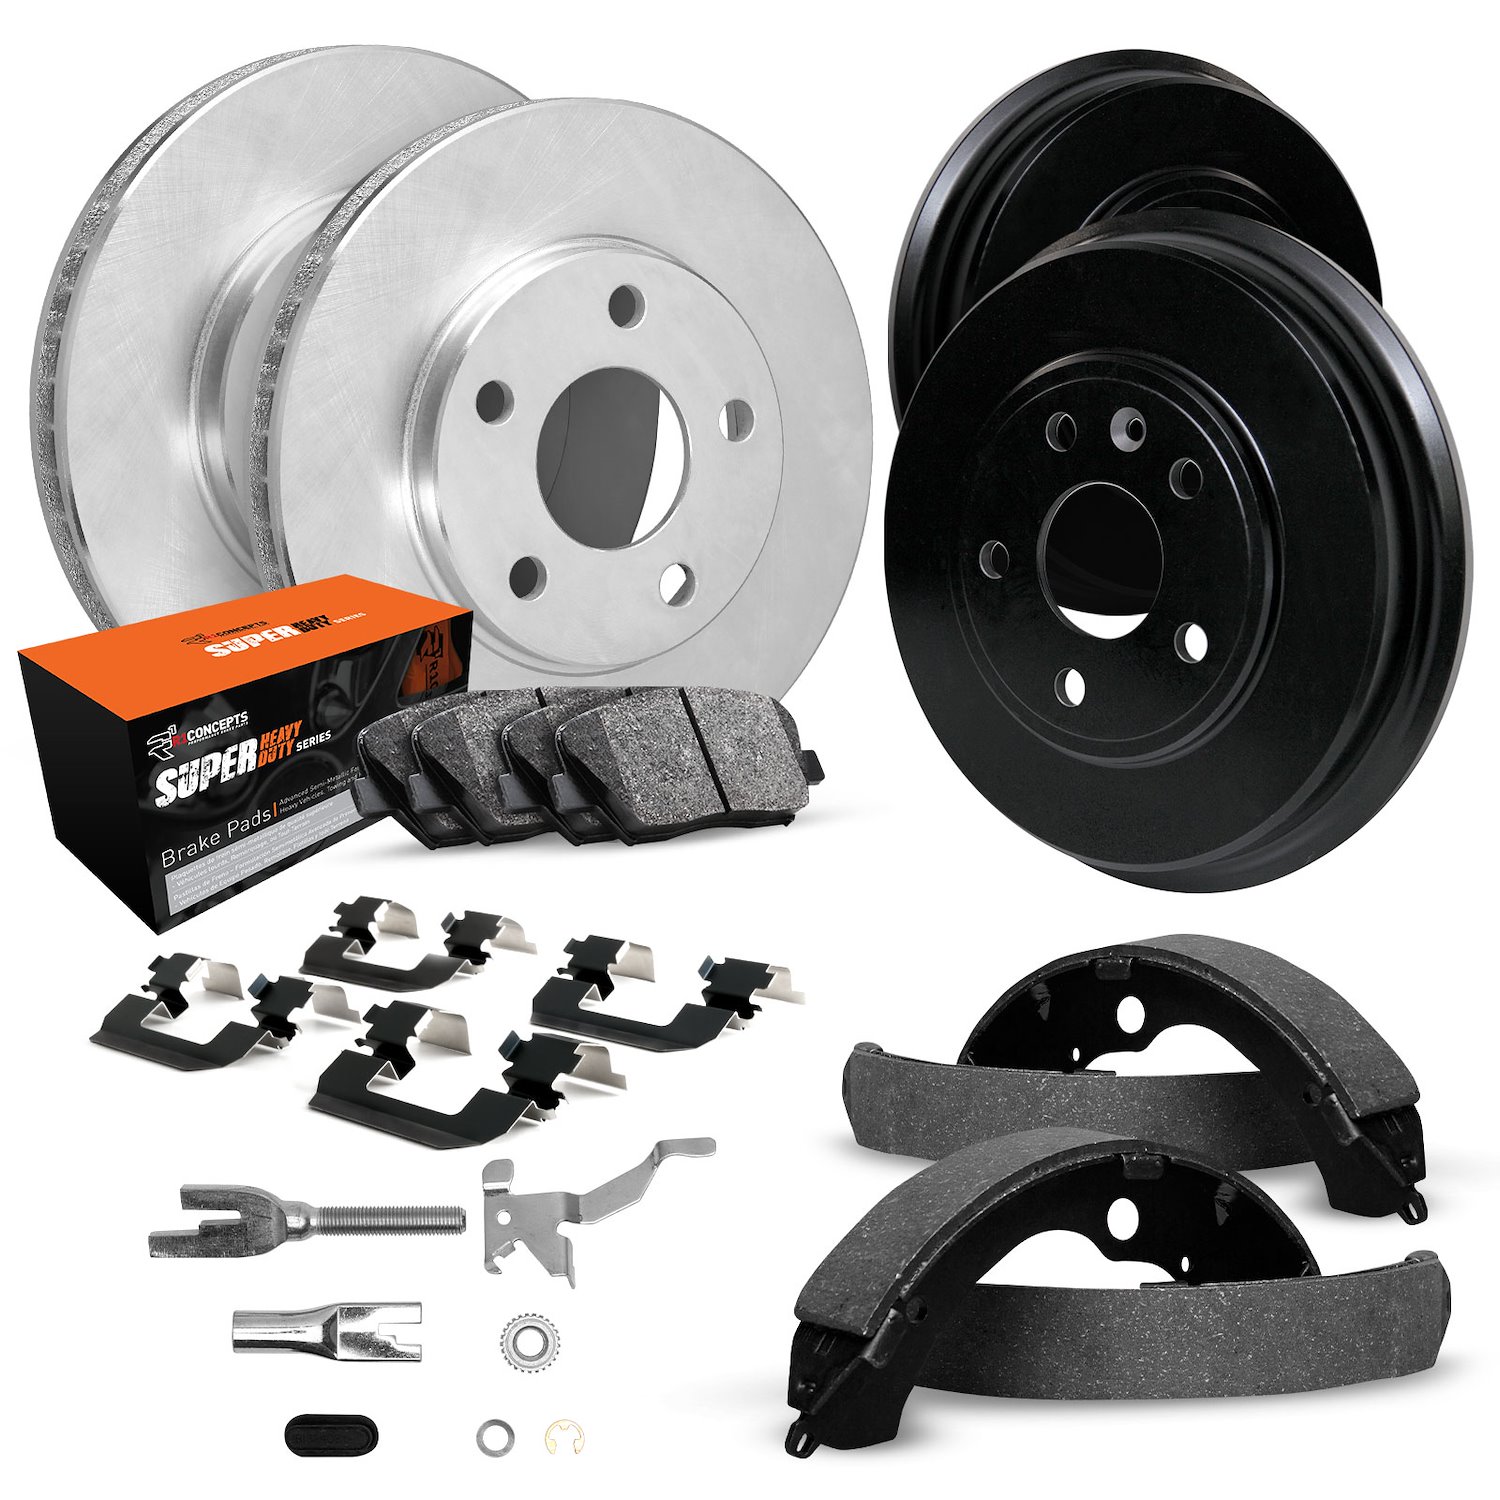 E-Line Blank Brake Rotor & Drum Set w/Super-Duty Pads, Shoes, Hardware, & Adjusters, 1987-1989 GM, Position: Front & Rear